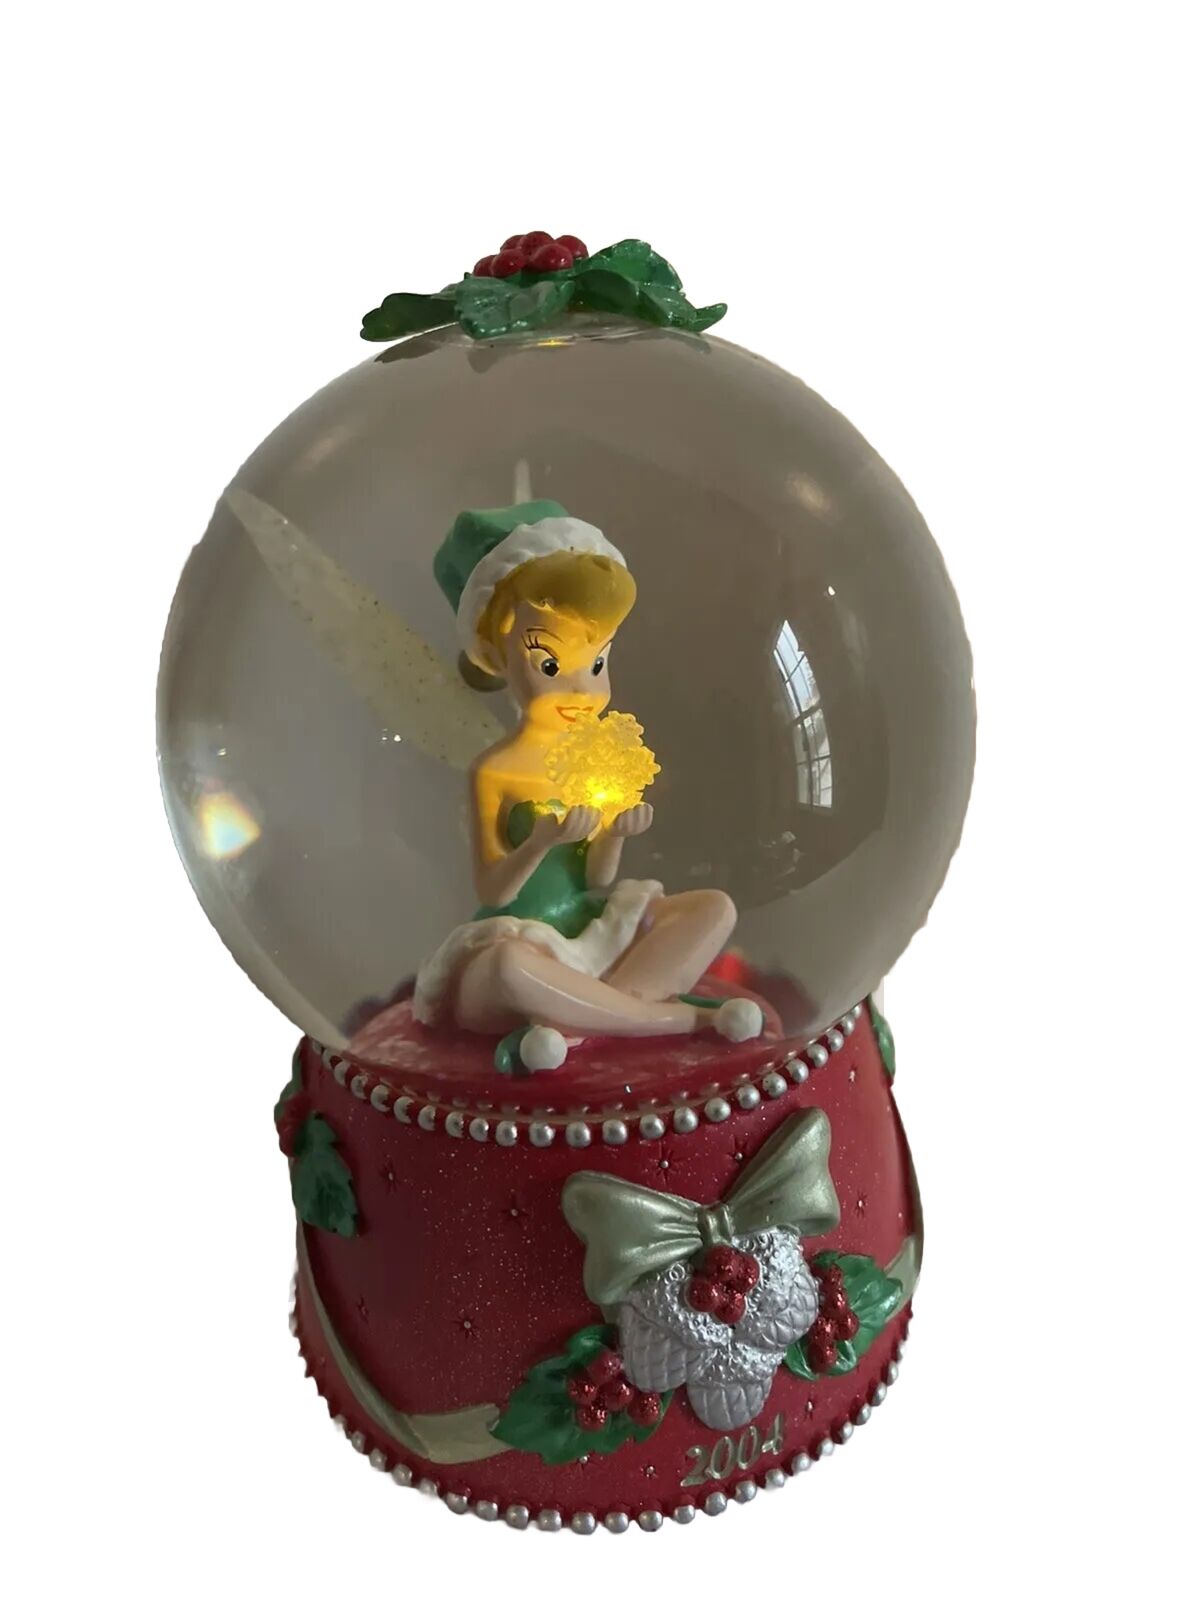 Authentic Christmas 2004 Exclusive Disney Store Tinker Bell Lighted Snow Globe 